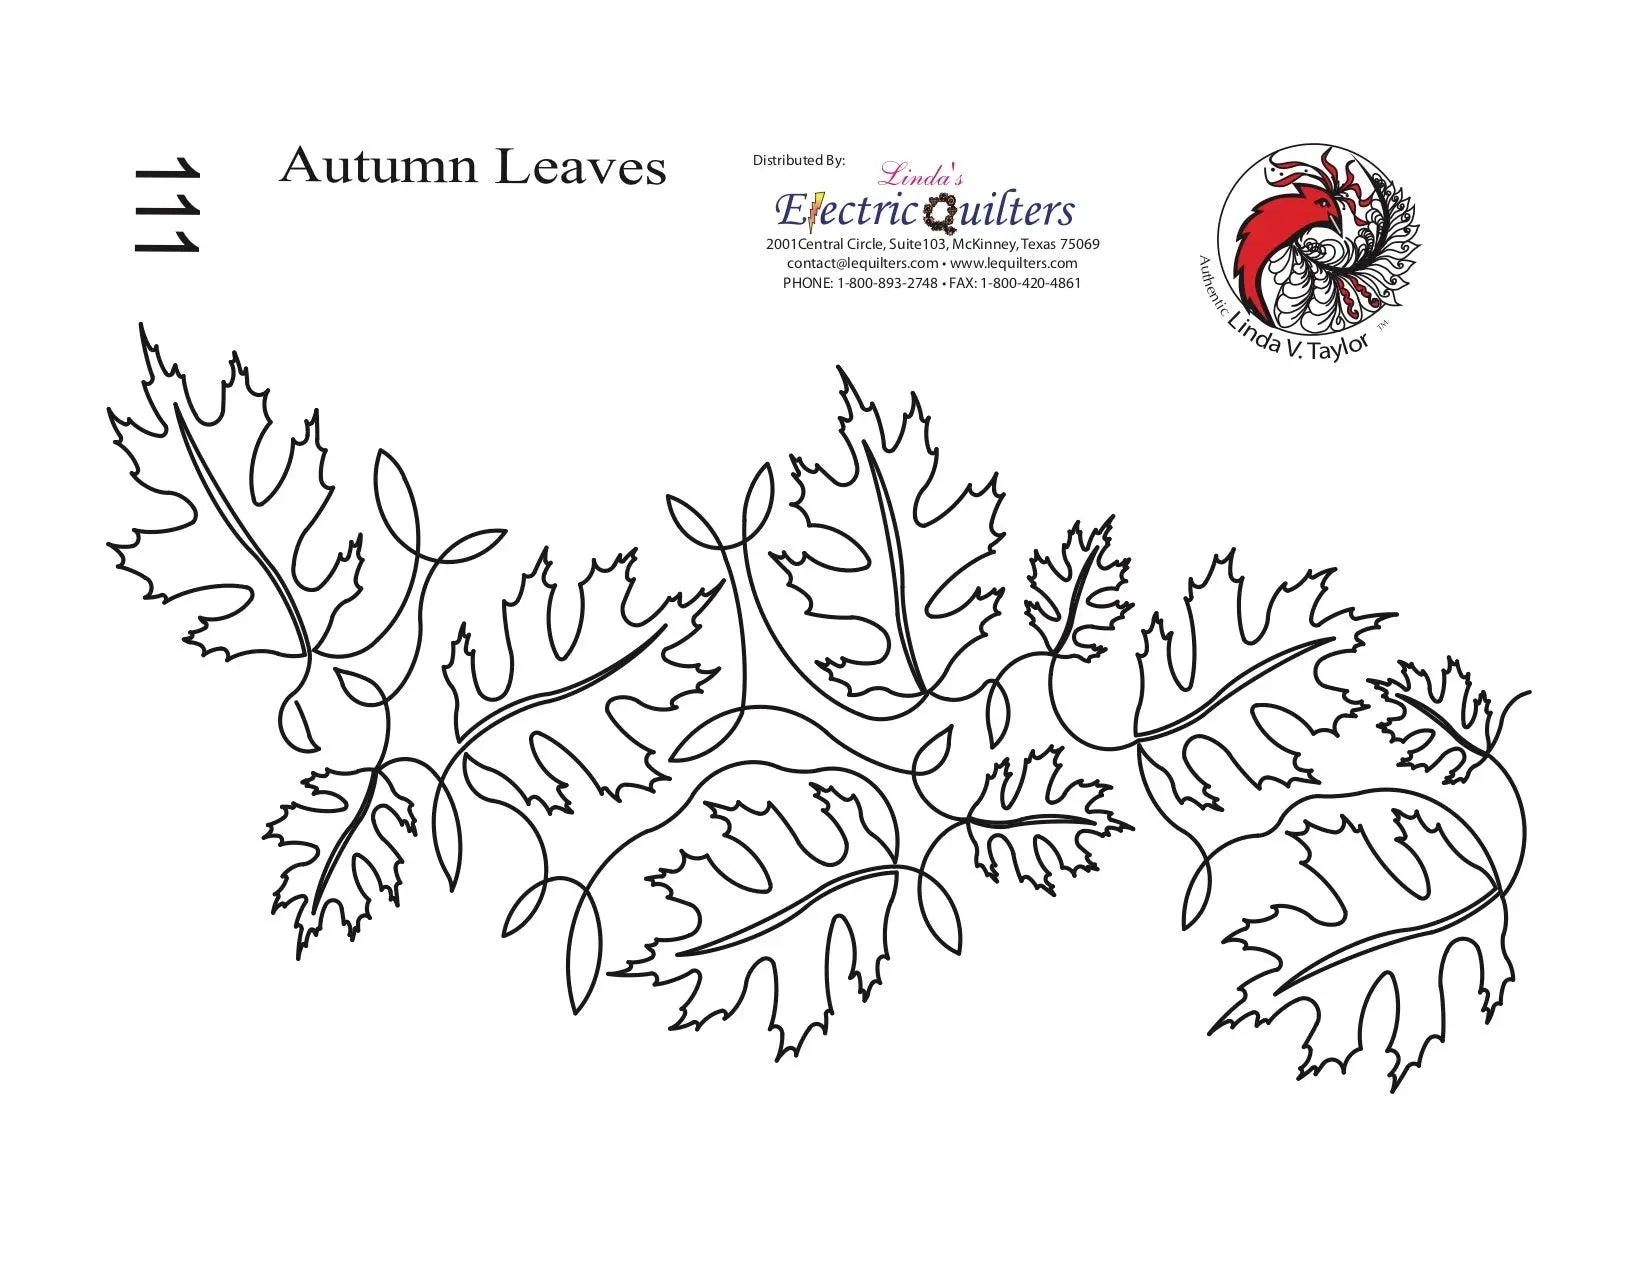 111 Autumn Leaves Pantograph by Linda V. Taylor - Linda's Electric Quilters